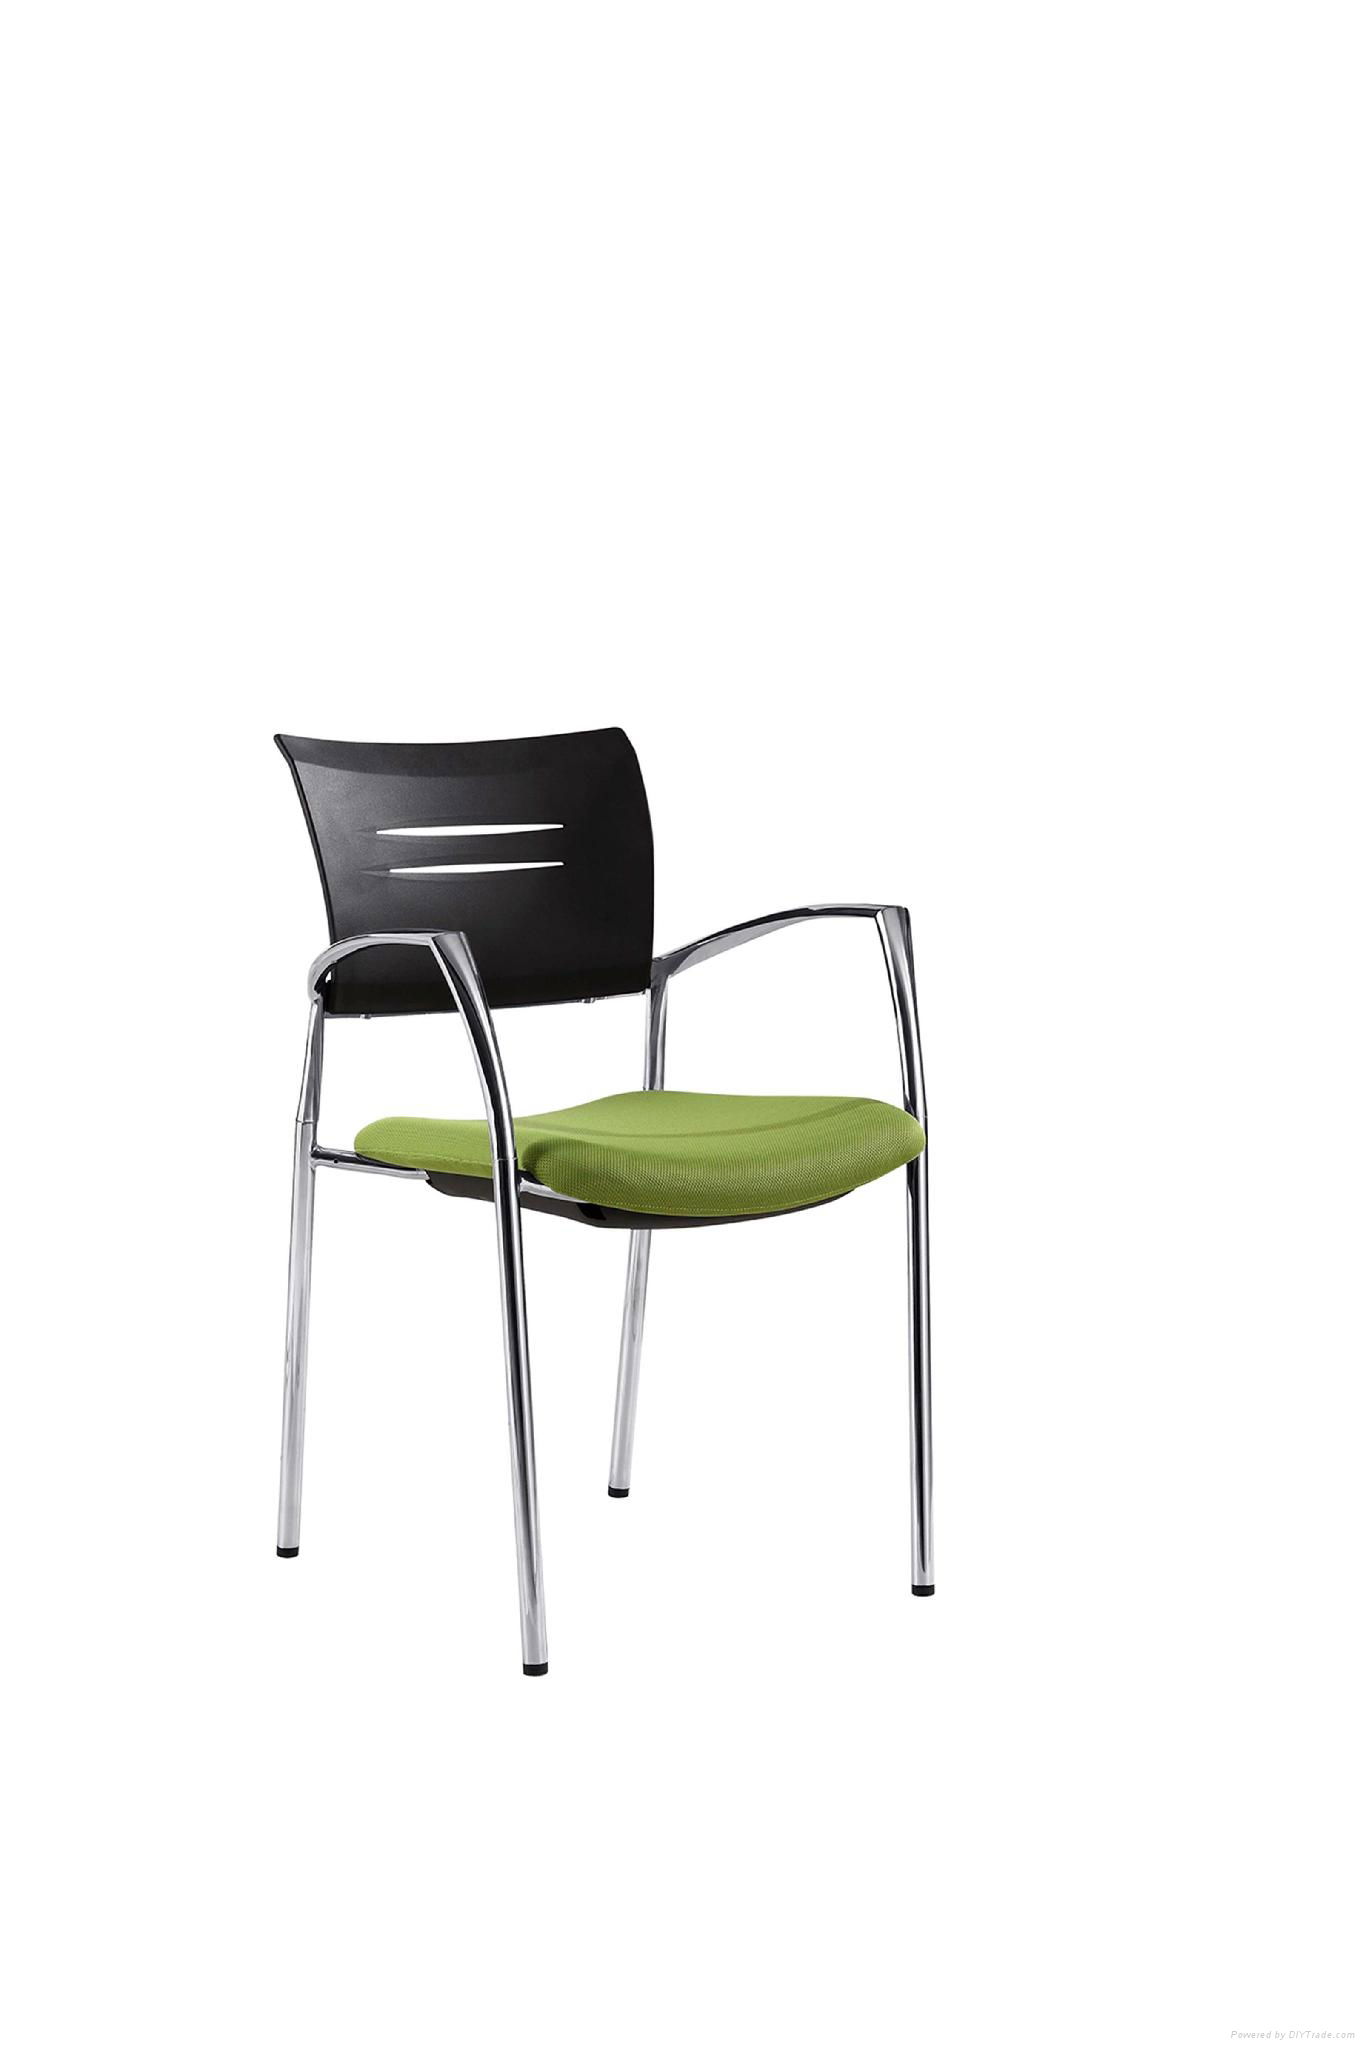 meeting chair without wheels 4